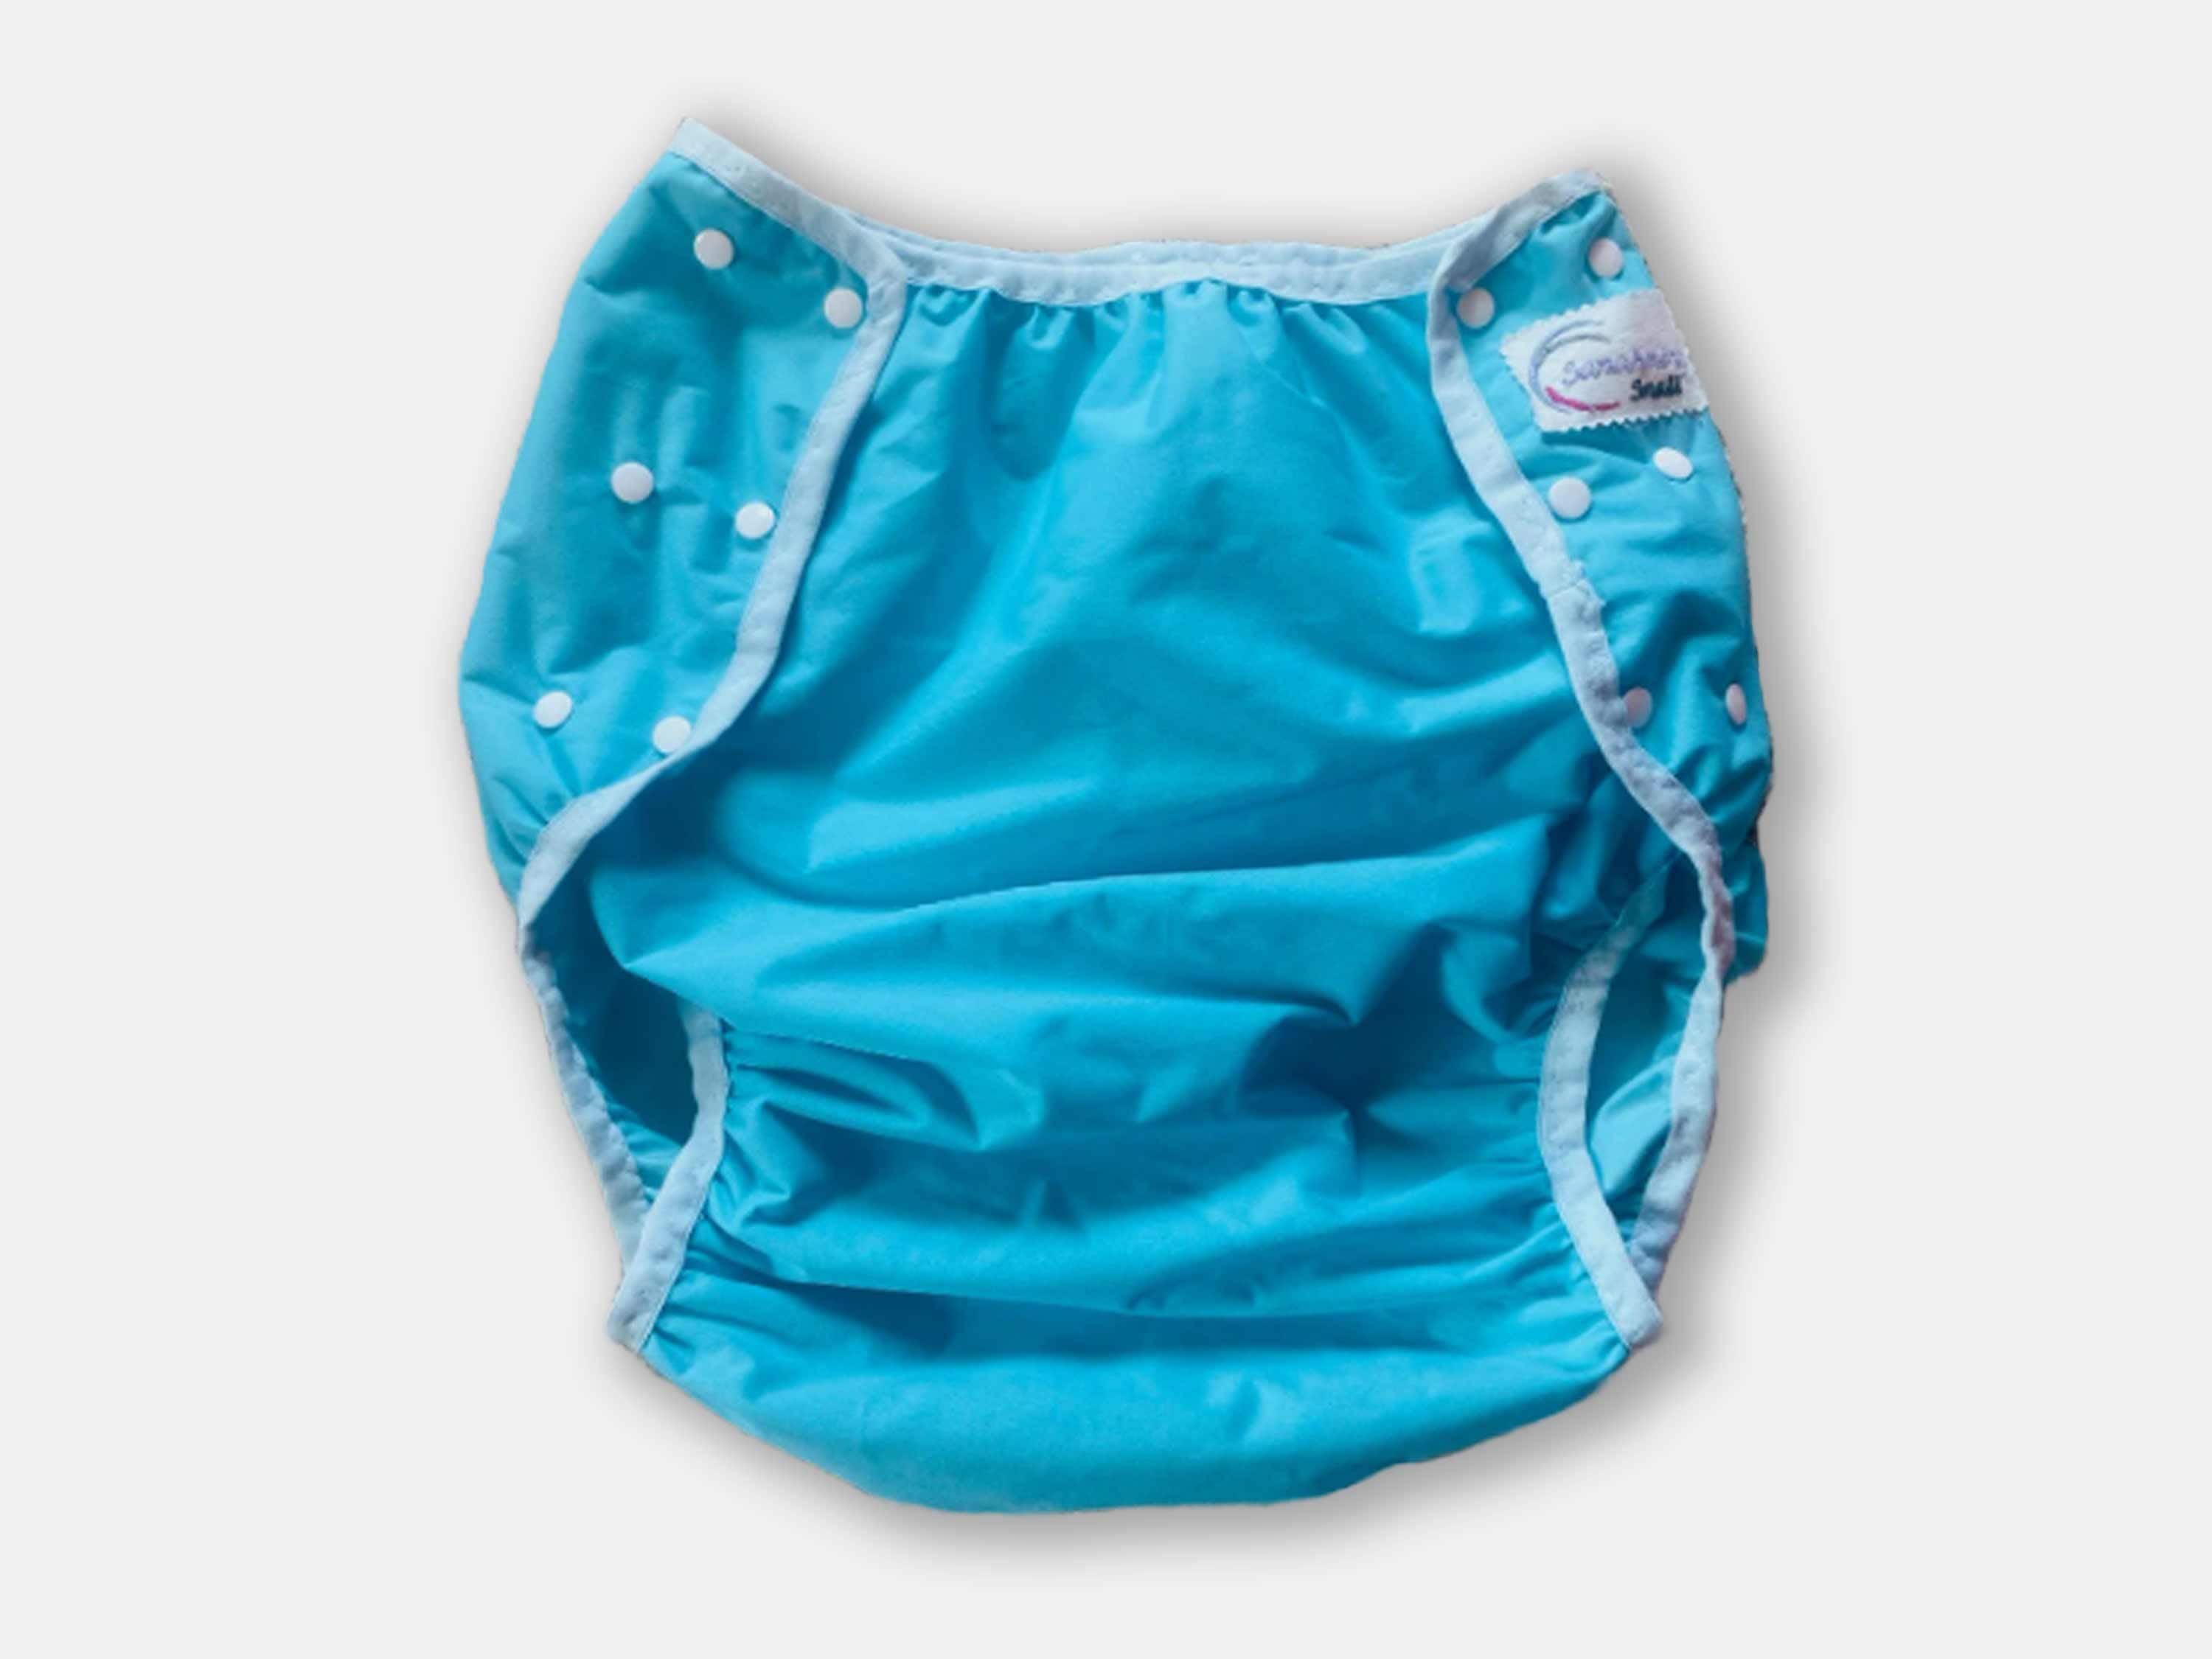 Buy Adult Diaper Cover Online In India -  India